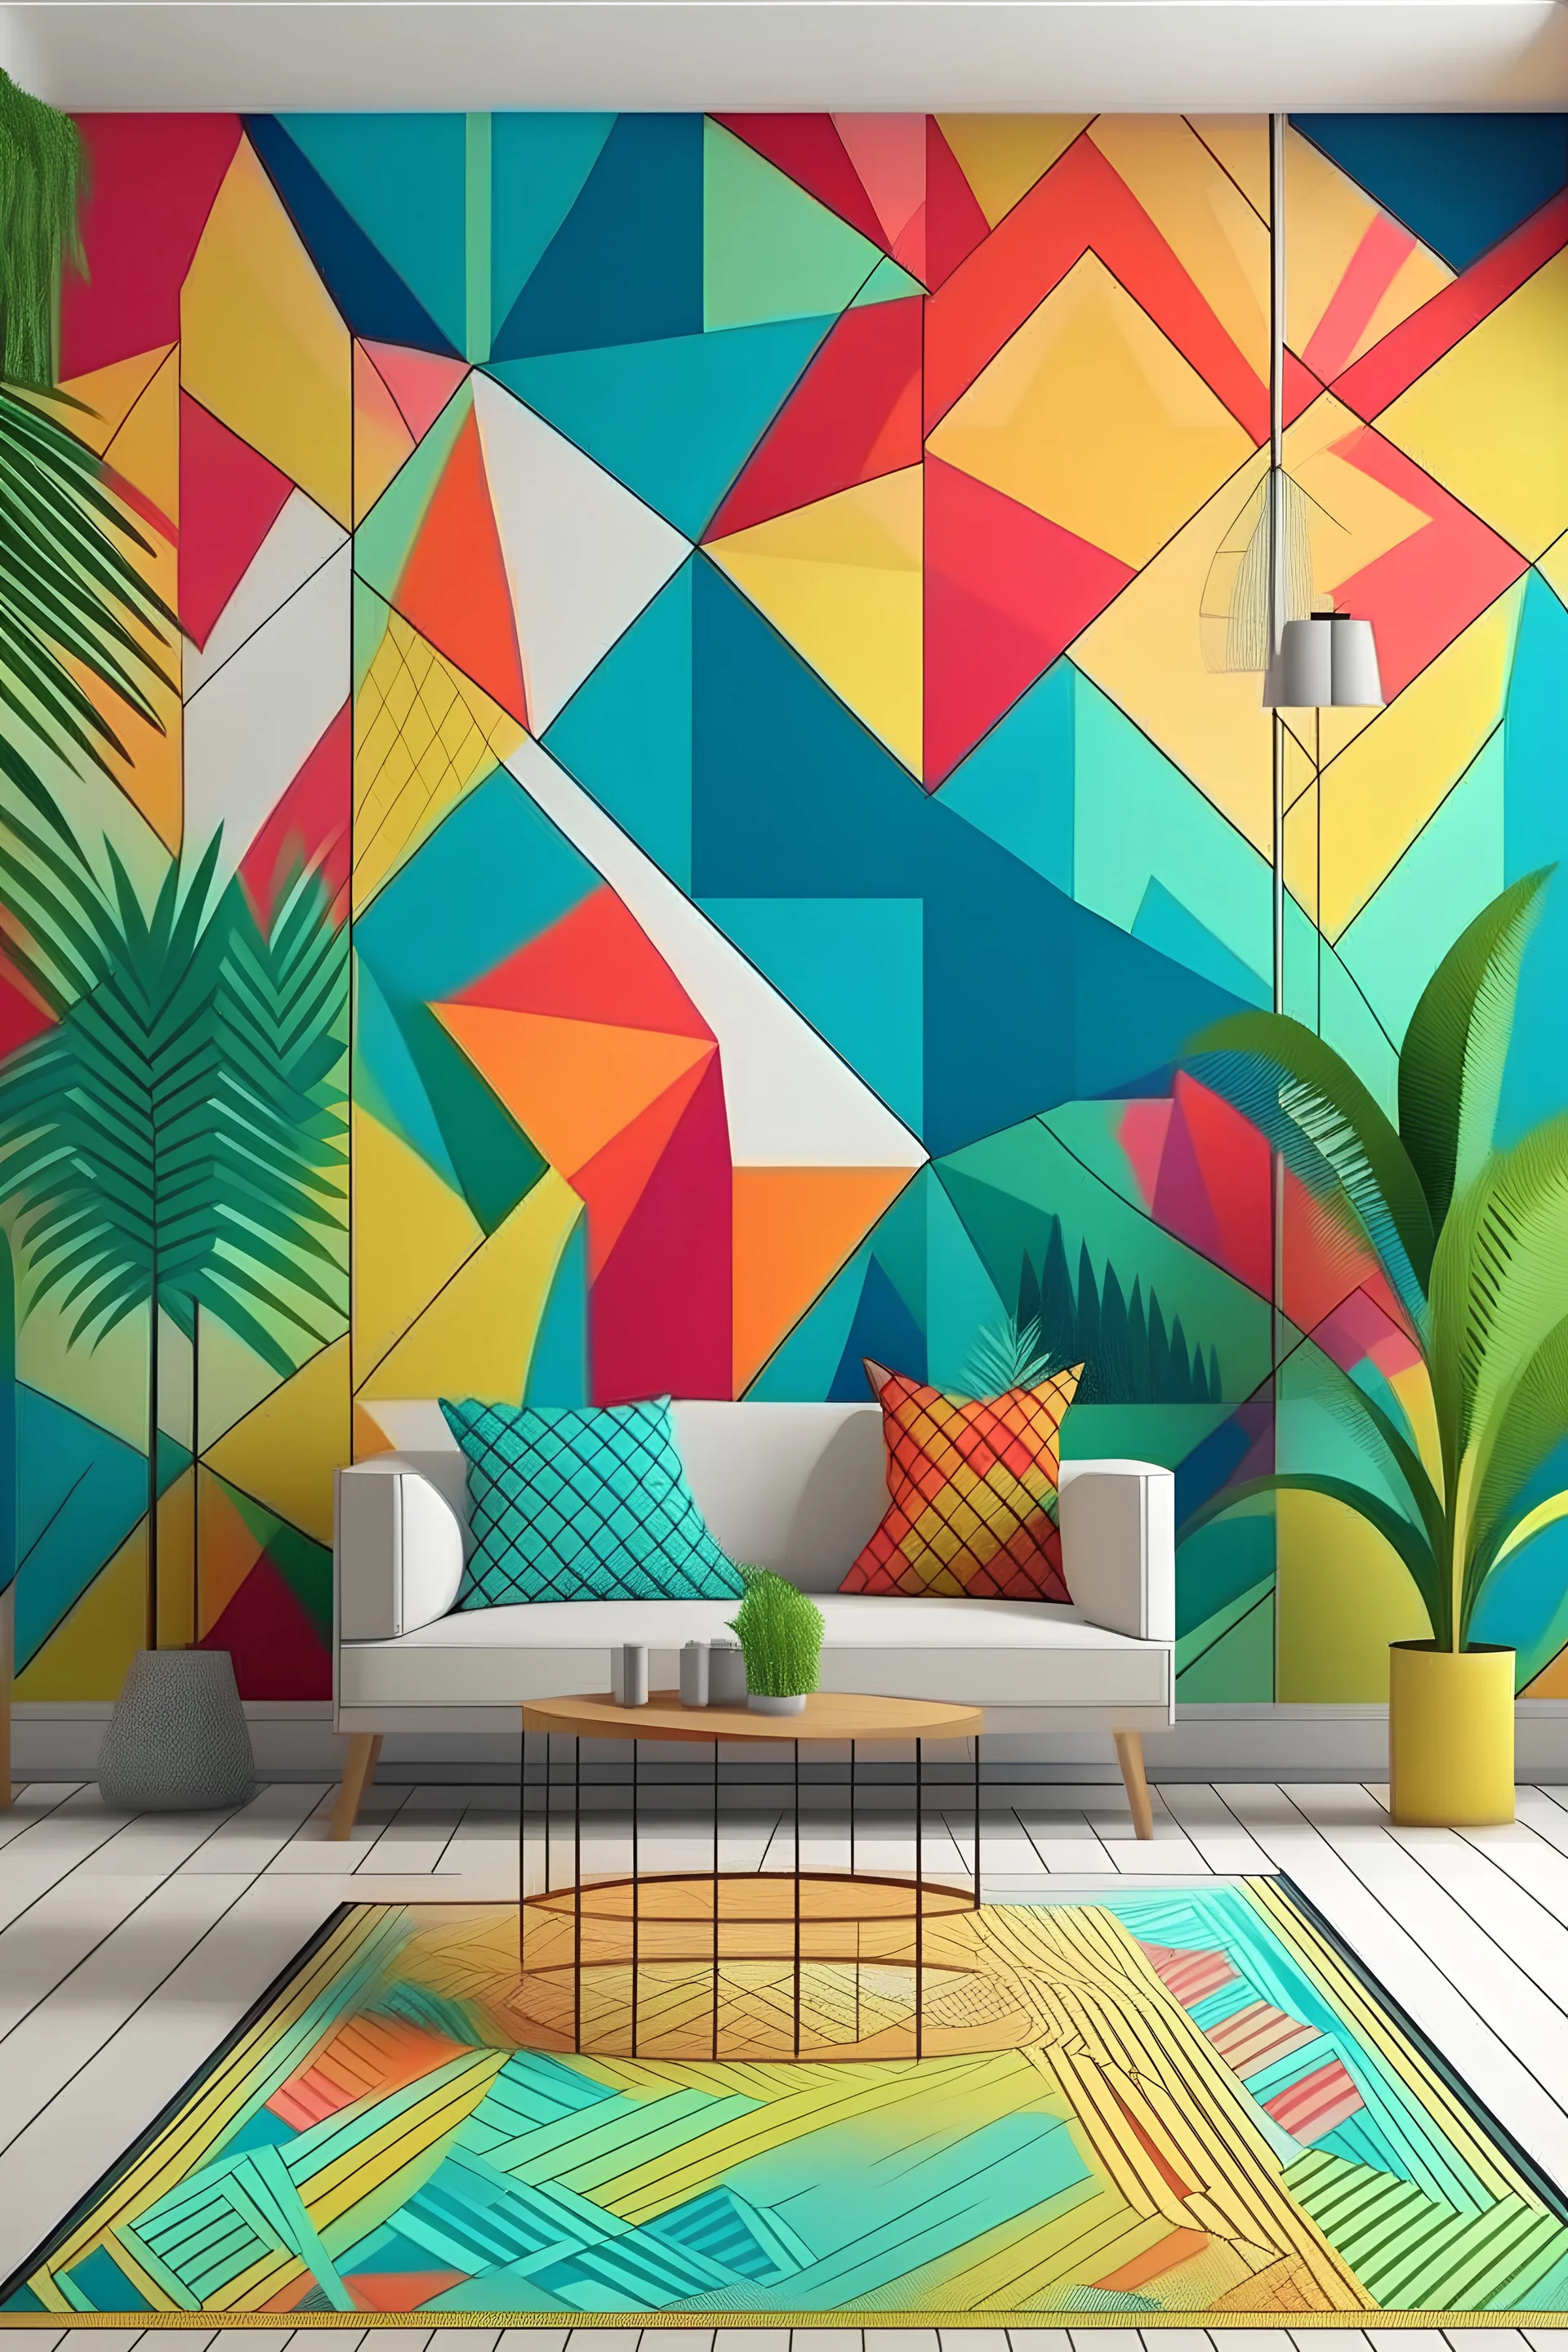 Create a handpainted geometric wall mural with playful geometric patterns in tropical punch colors. Infuse the space with the lively and bright vibes of a tropical paradise."